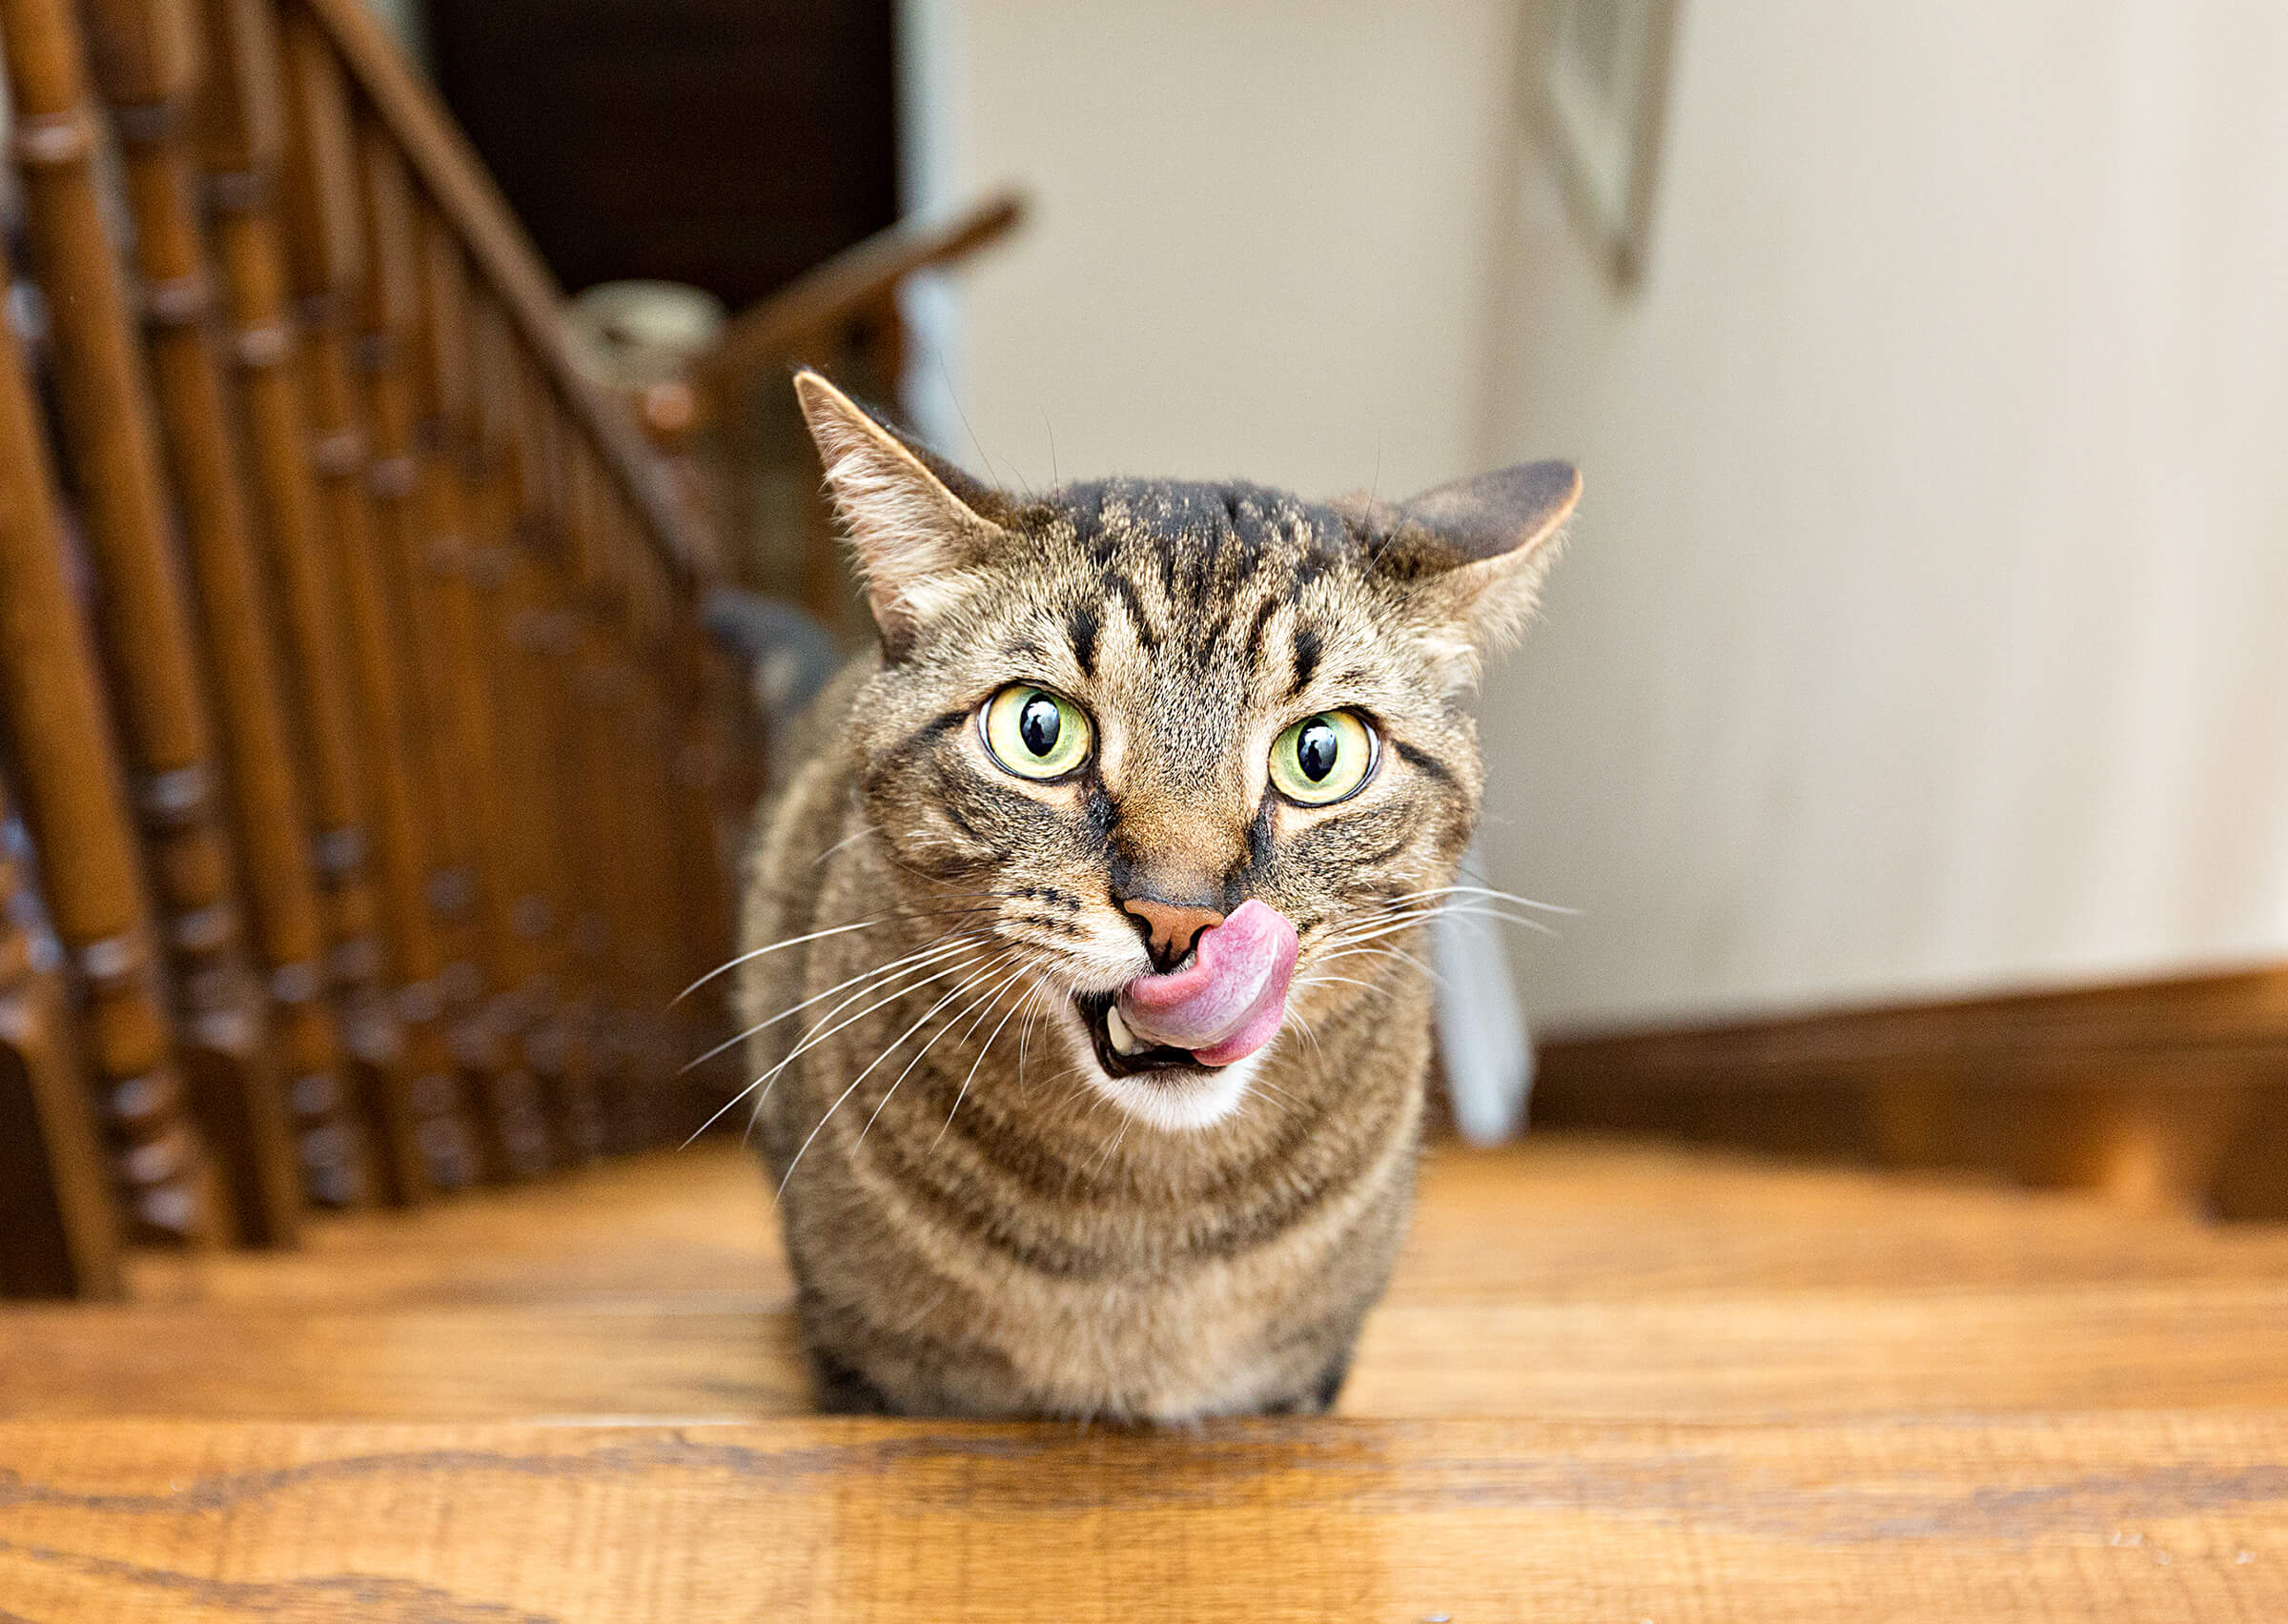 cat running up stairs with tongue out